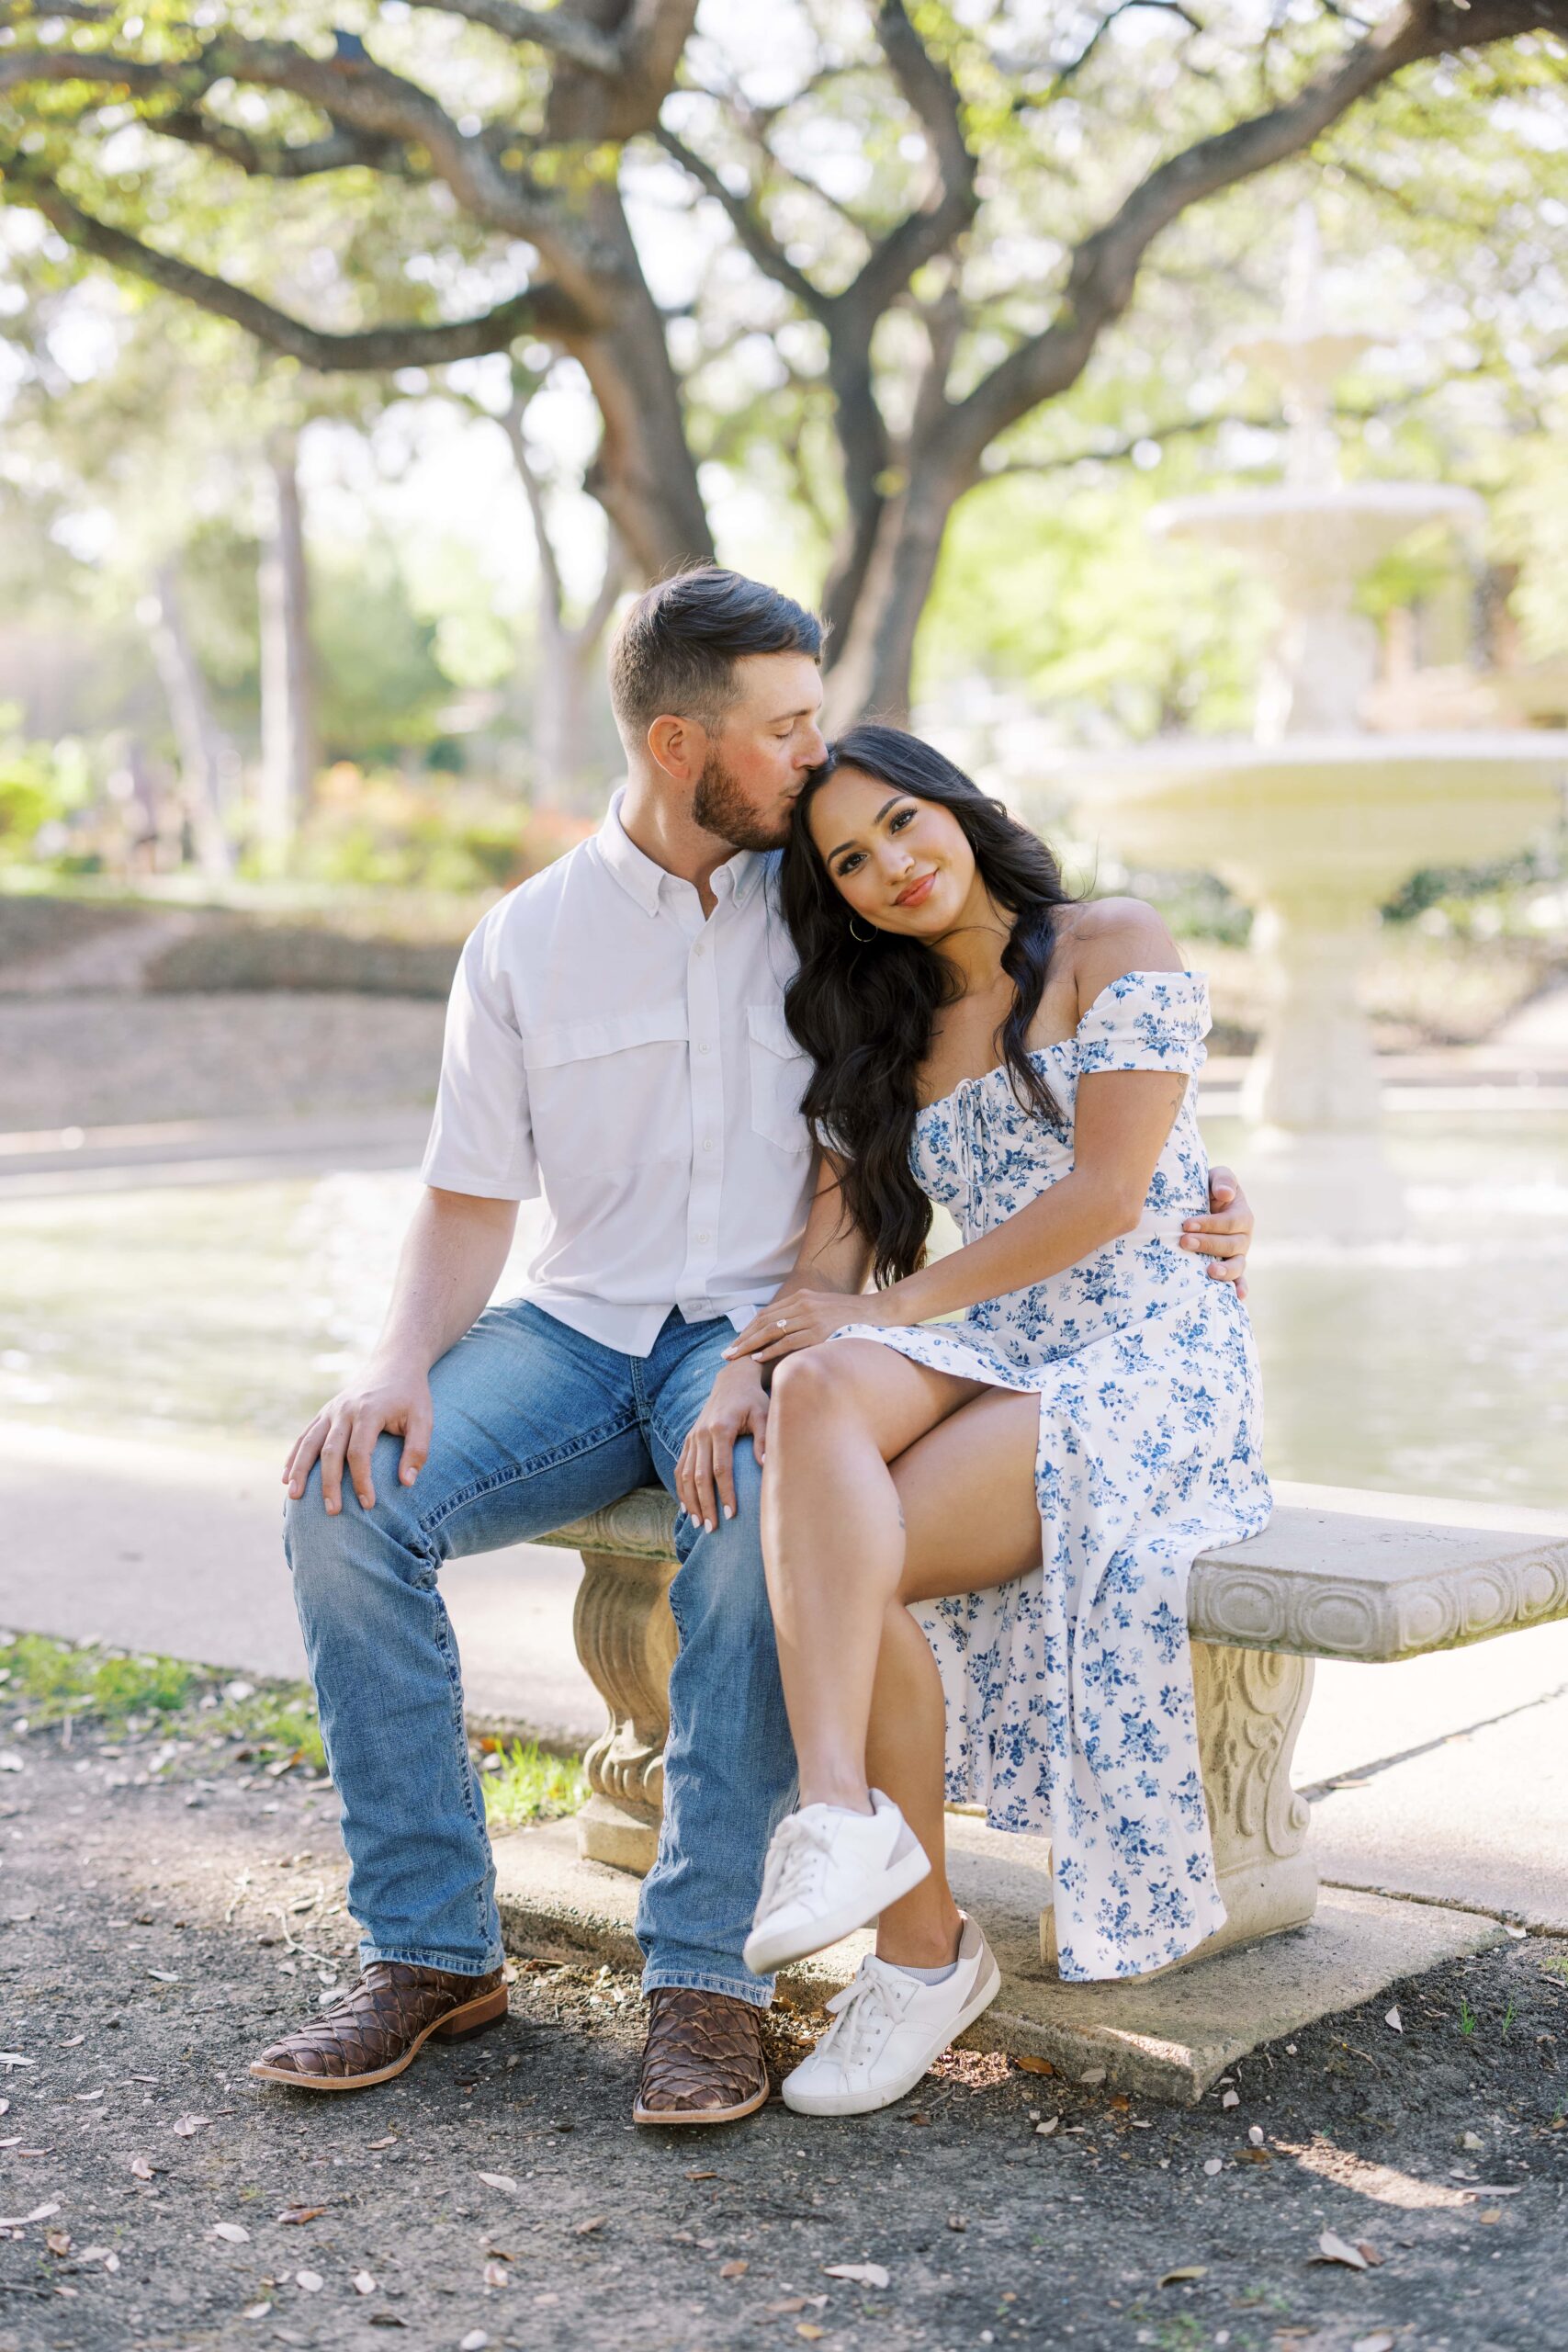 peyton kissing gabriela at flippen park during their engagement session